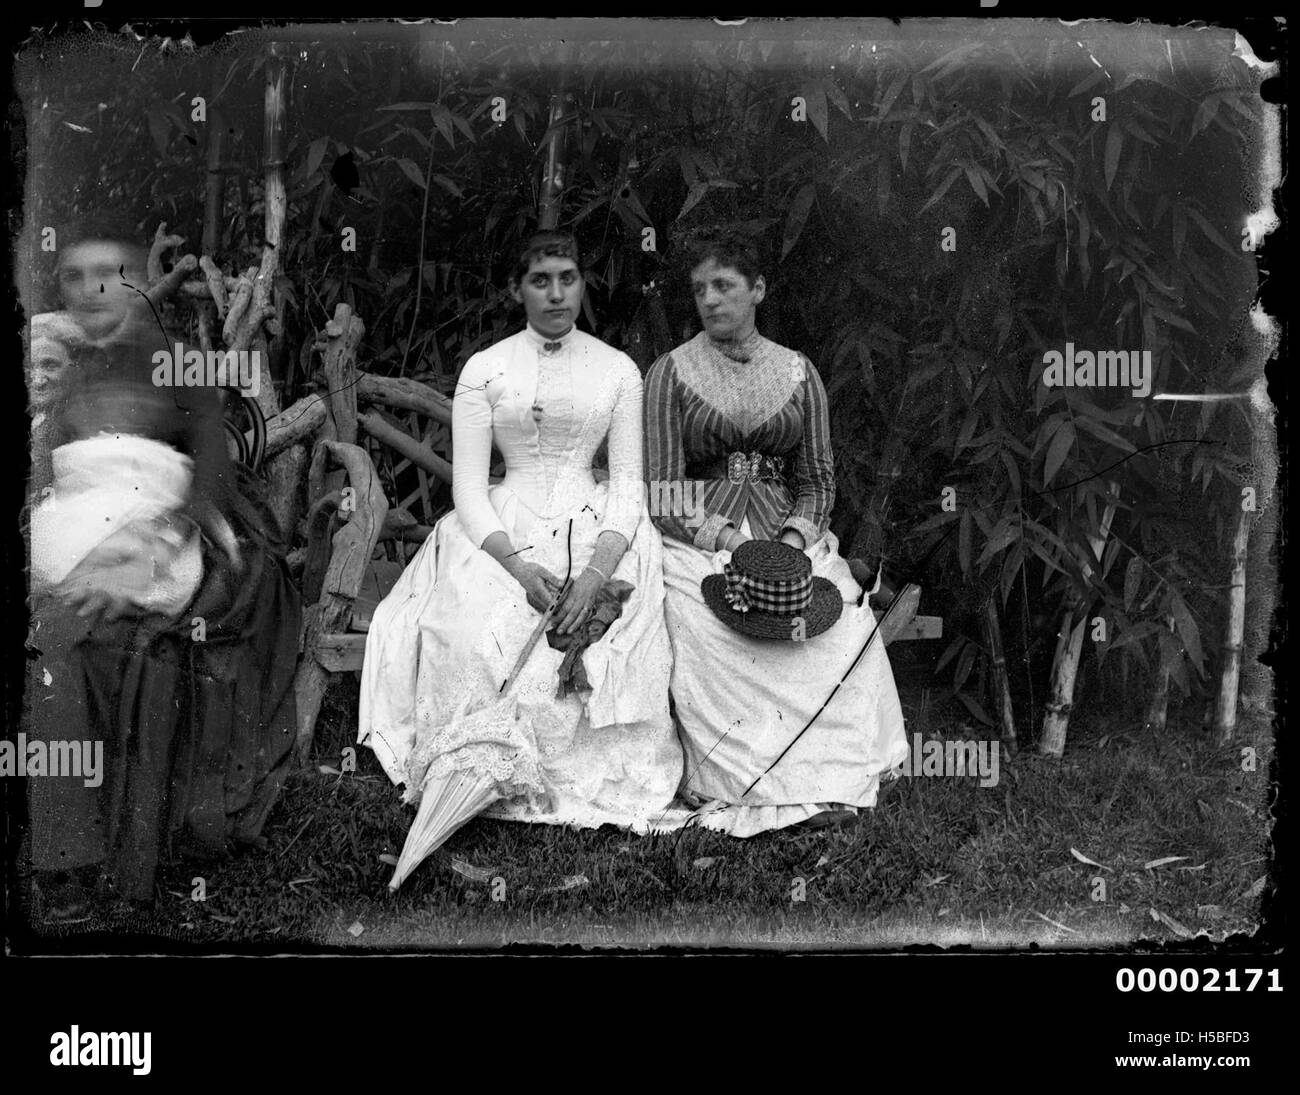 Portrait of two women seated Stock Photo - Alamy